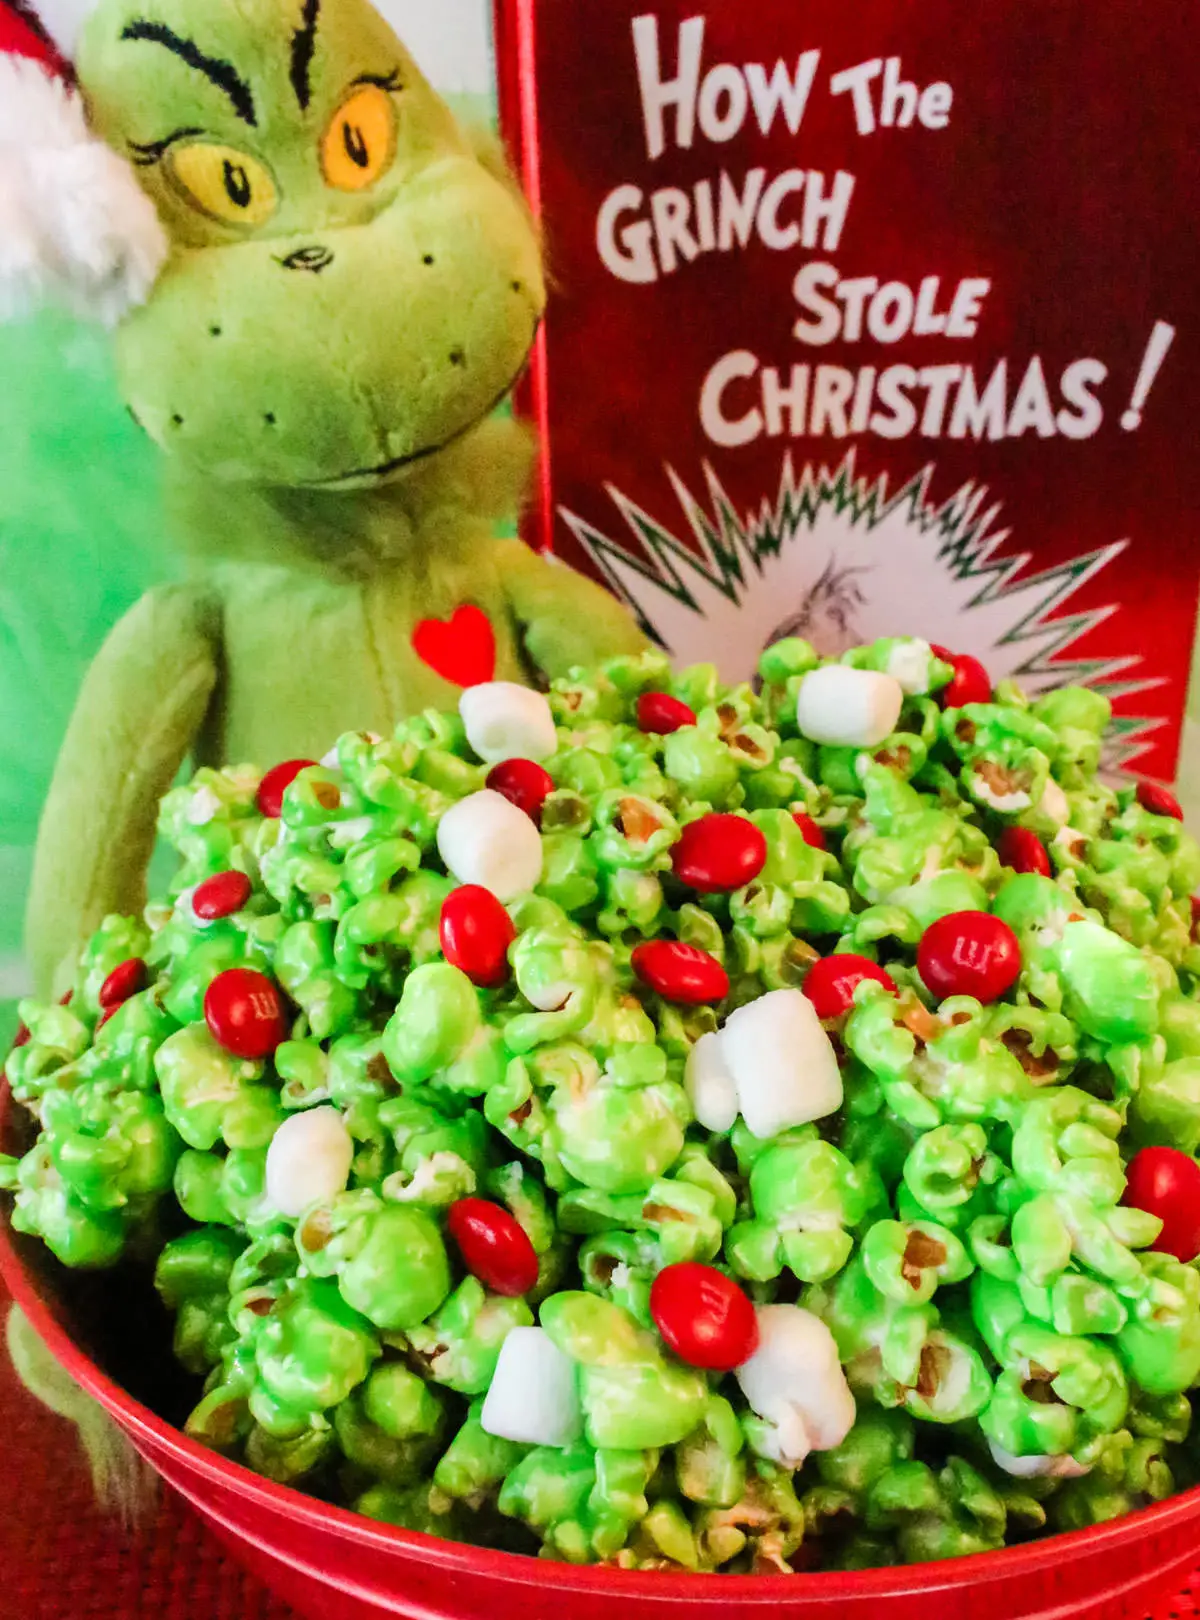 https://juelzjohn.com/wp-content/uploads/2023/04/Grinch-christmas-party-ideas-12.png